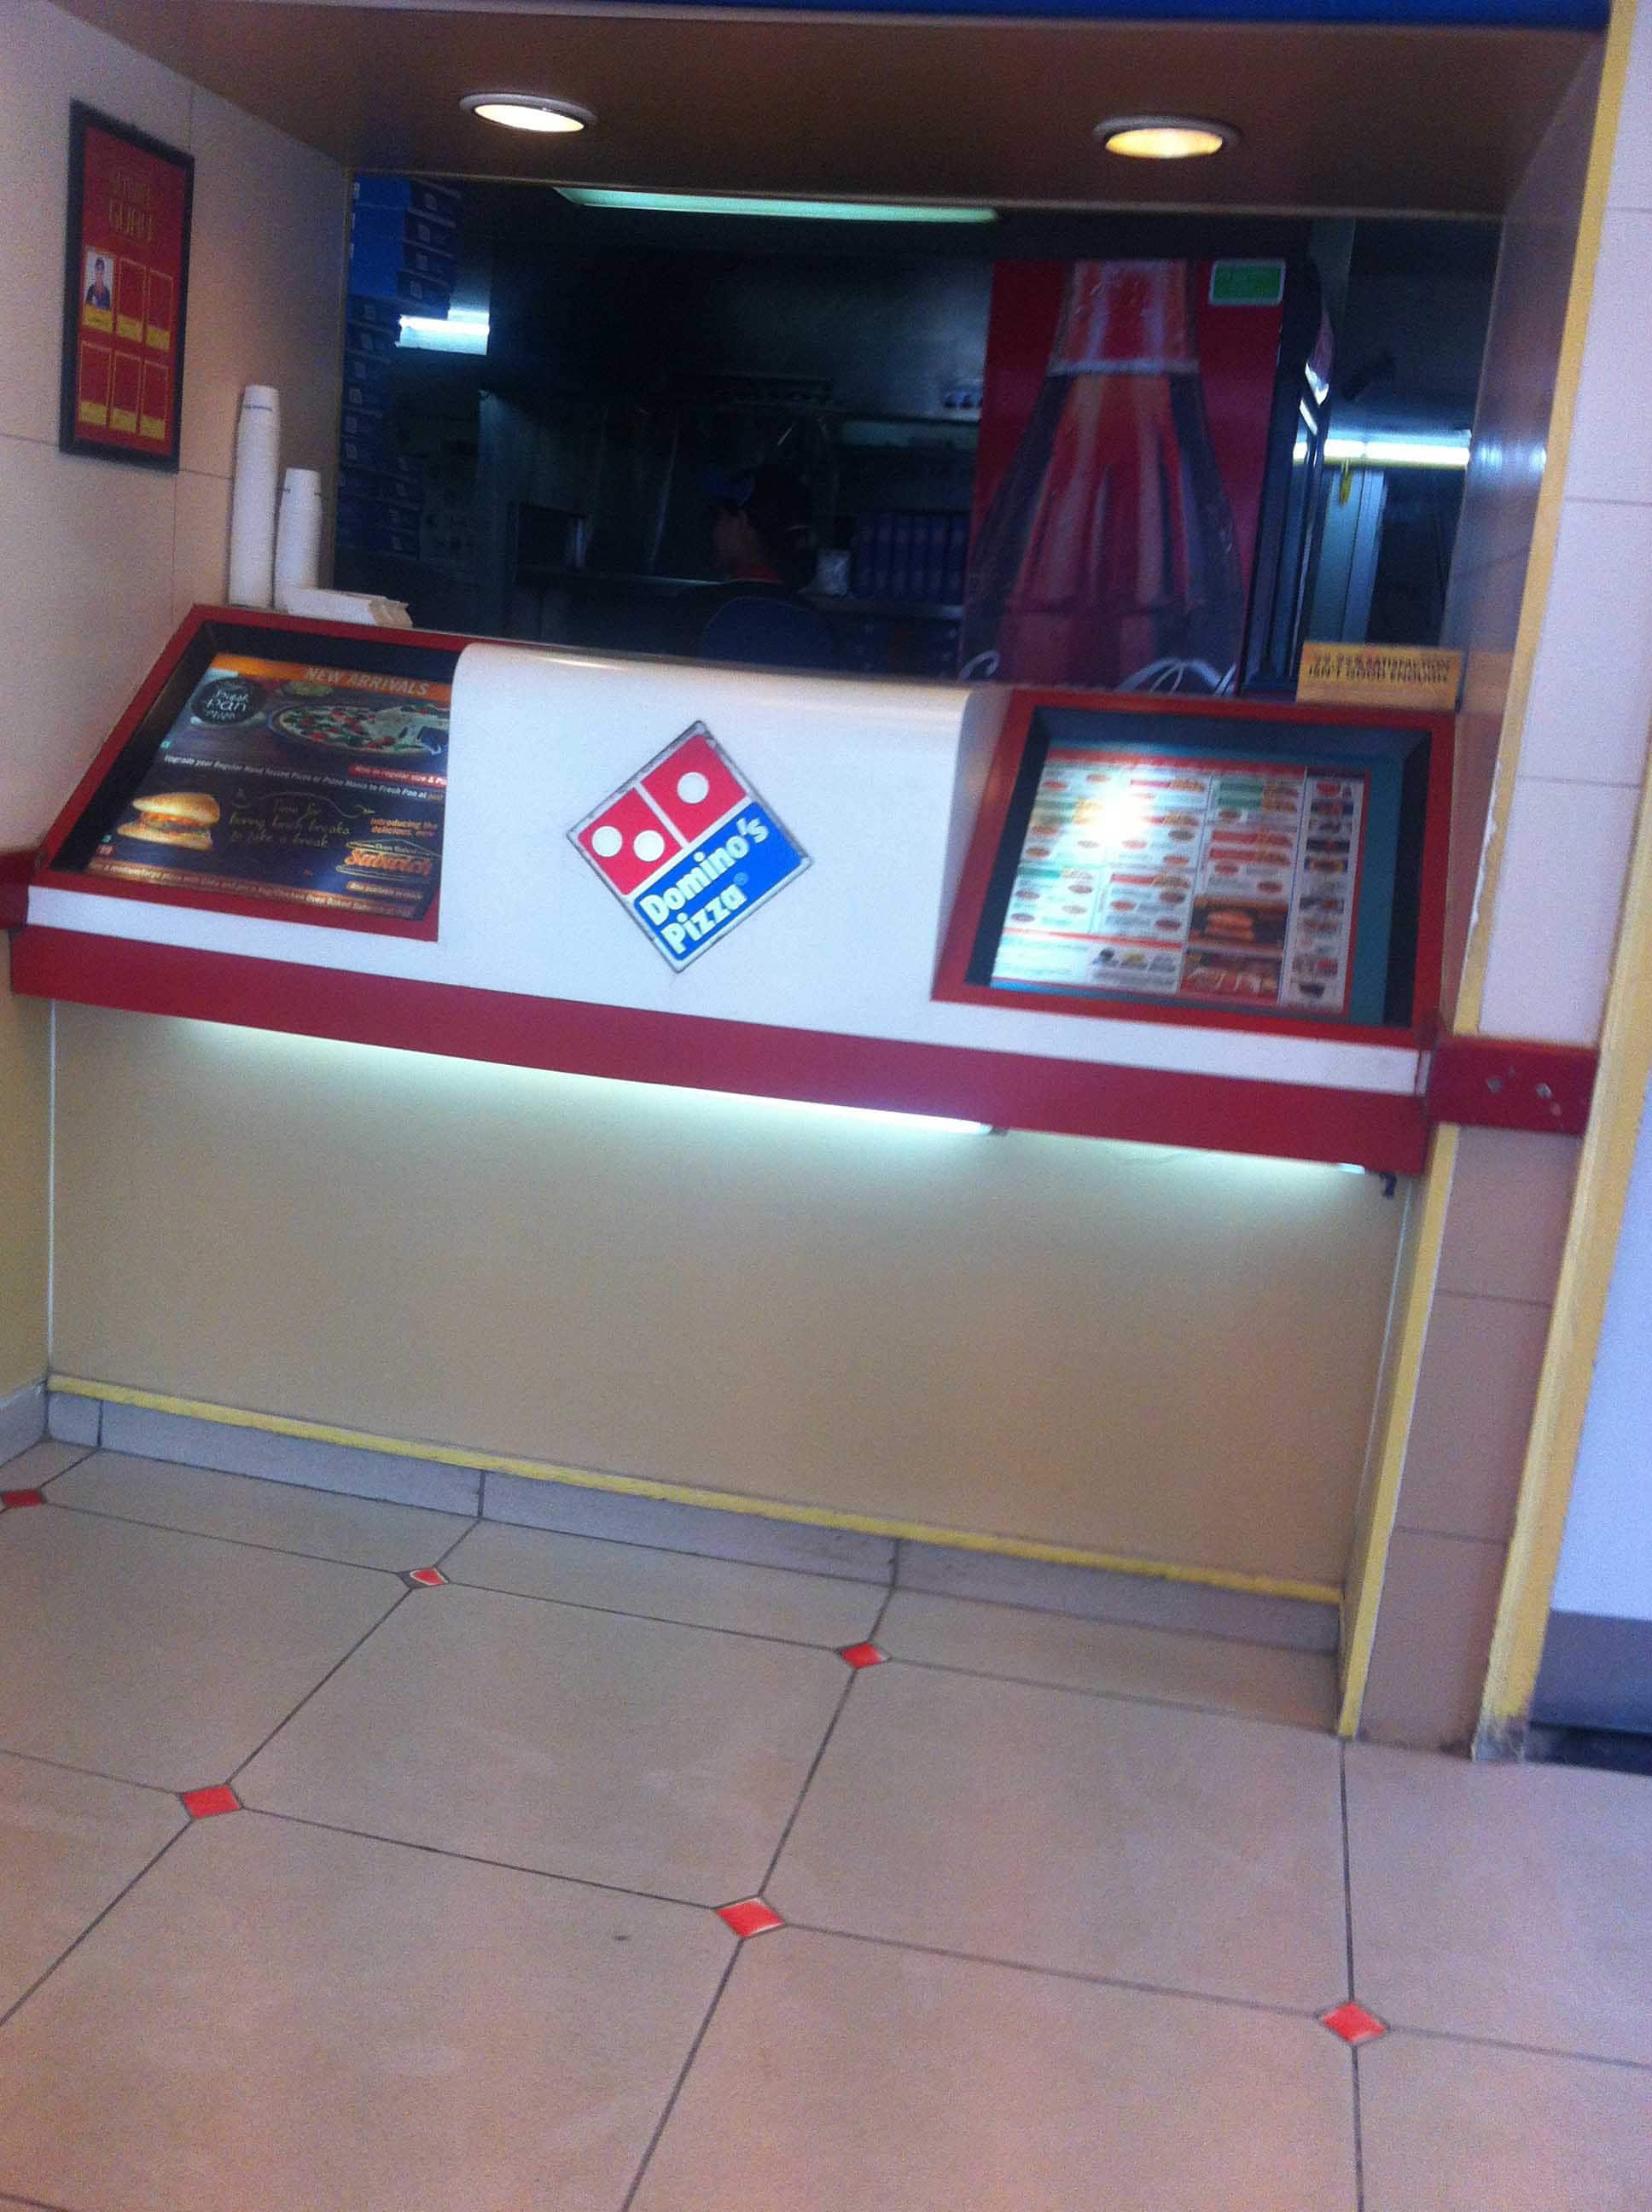 dominos number gurgaon sector 29